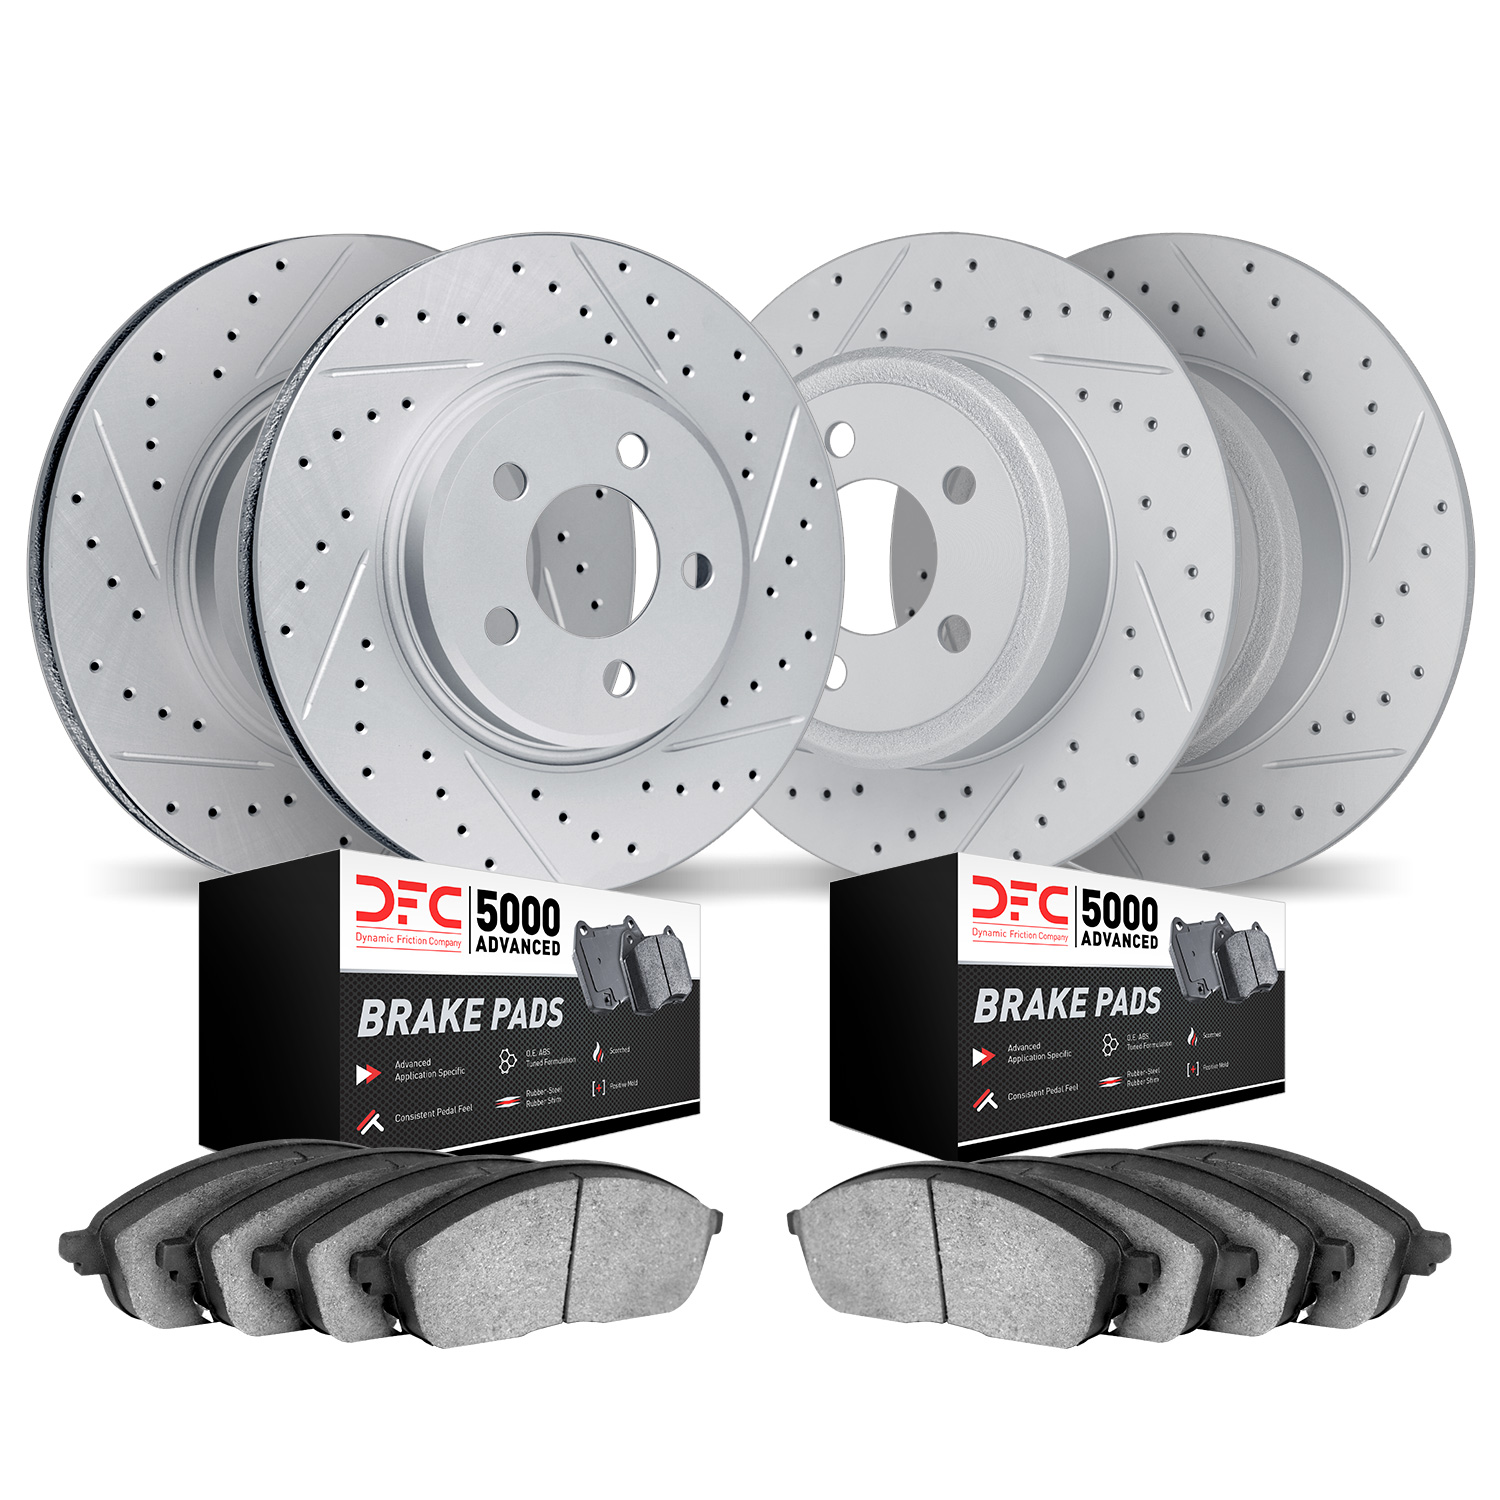 2504-76101 Geoperformance Drilled/Slotted Rotors w/5000 Advanced Brake Pads Kit, 2002-2006 Lexus/Toyota/Scion, Position: Front a